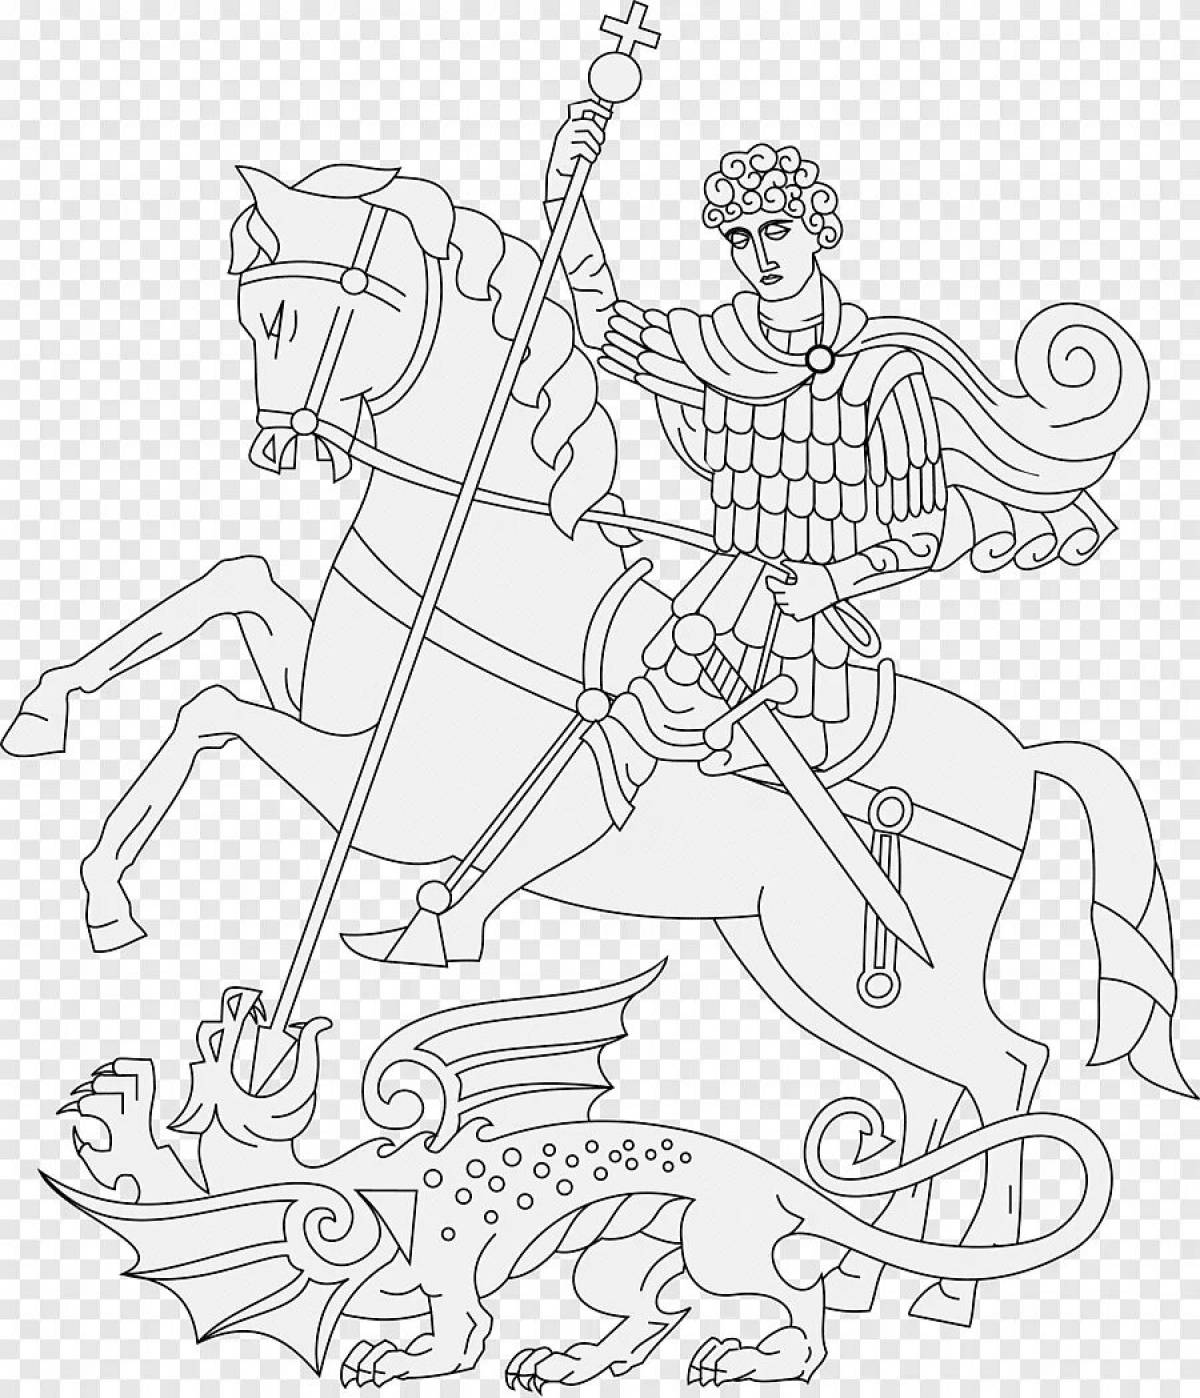 Relaxing george the victorious coloring book